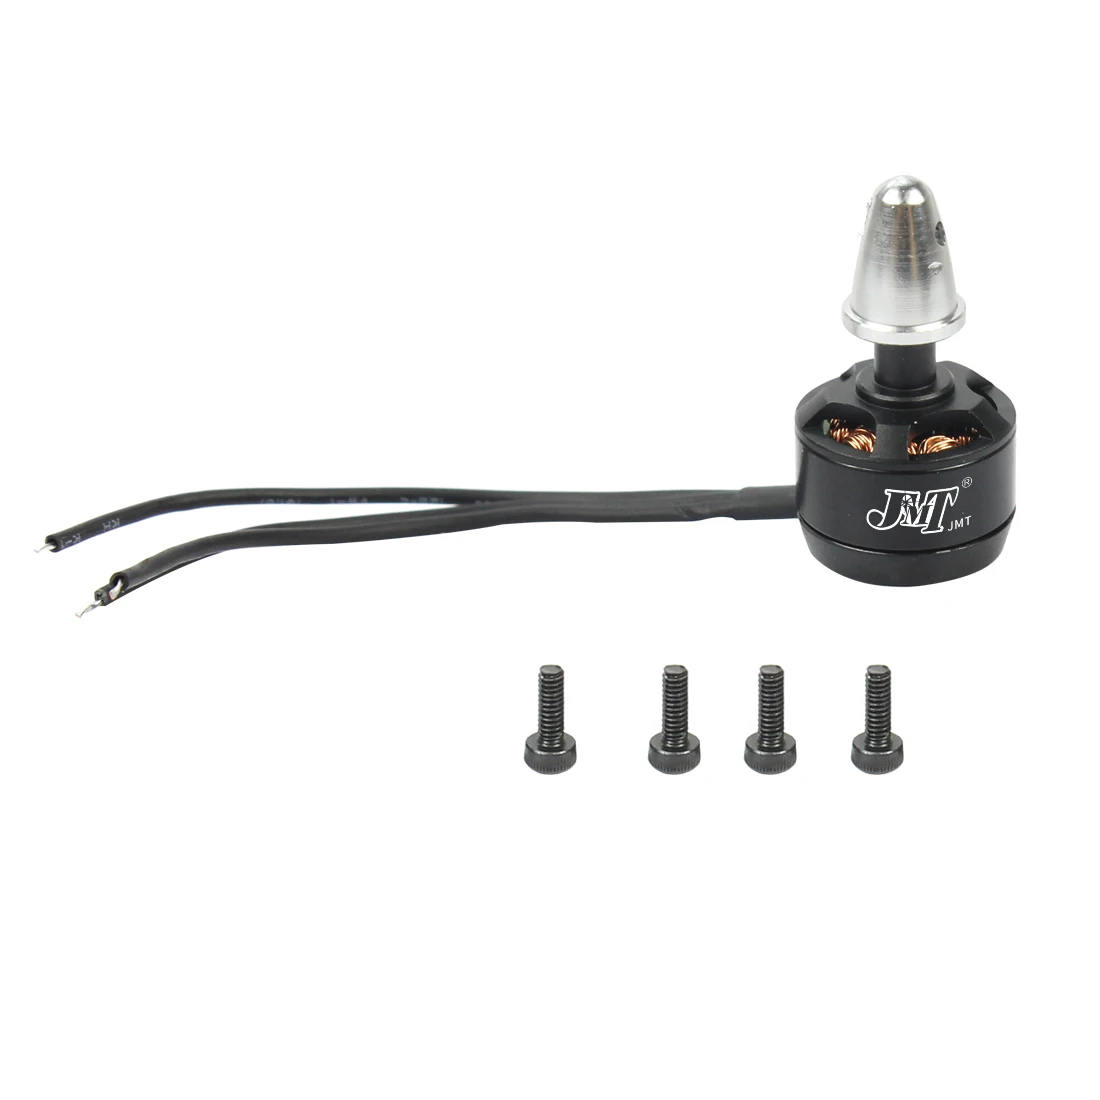 

F16814/15 1 Piece Mini 1306 3100KV CW / CCW Brushless Motor for DIY RC Multicopter Mini 130 150 180 200 210 Quadcopter Drone